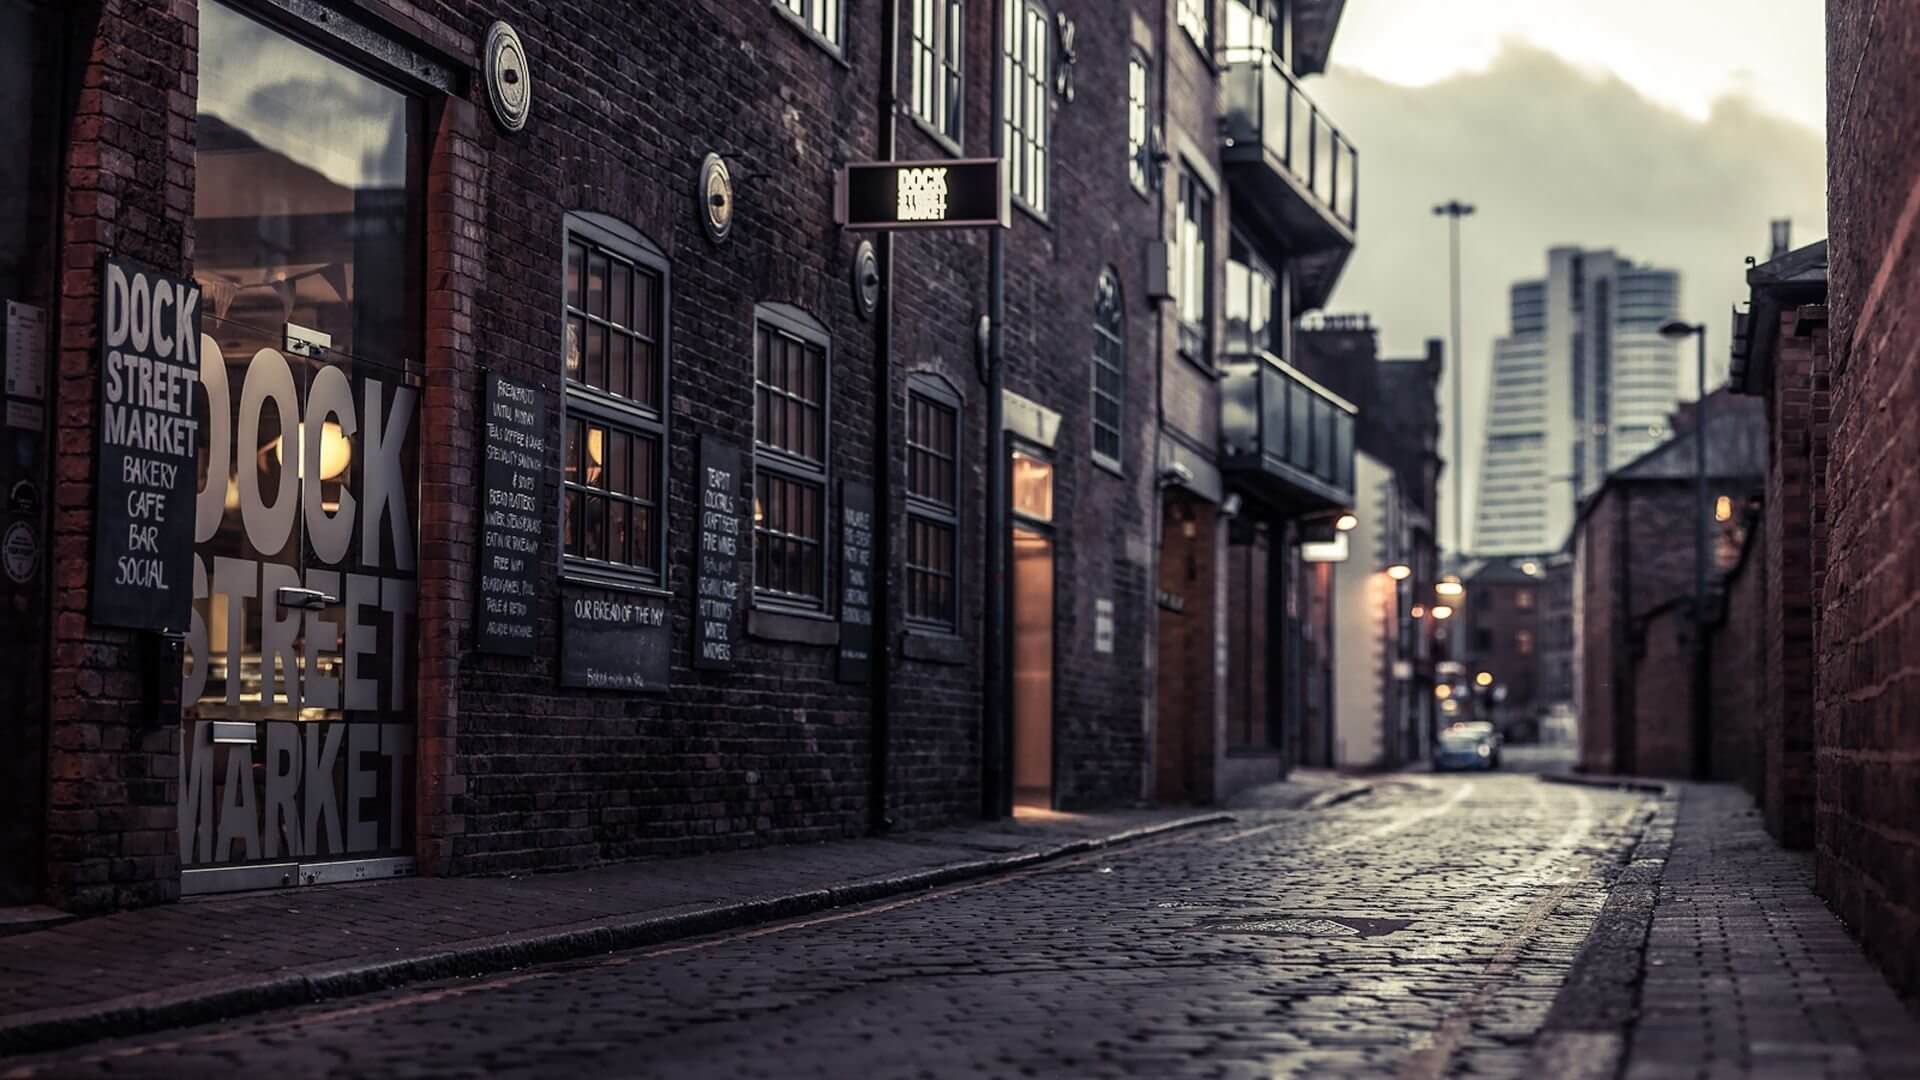 Photo of a narrow street in an urban area for an urban studies paper